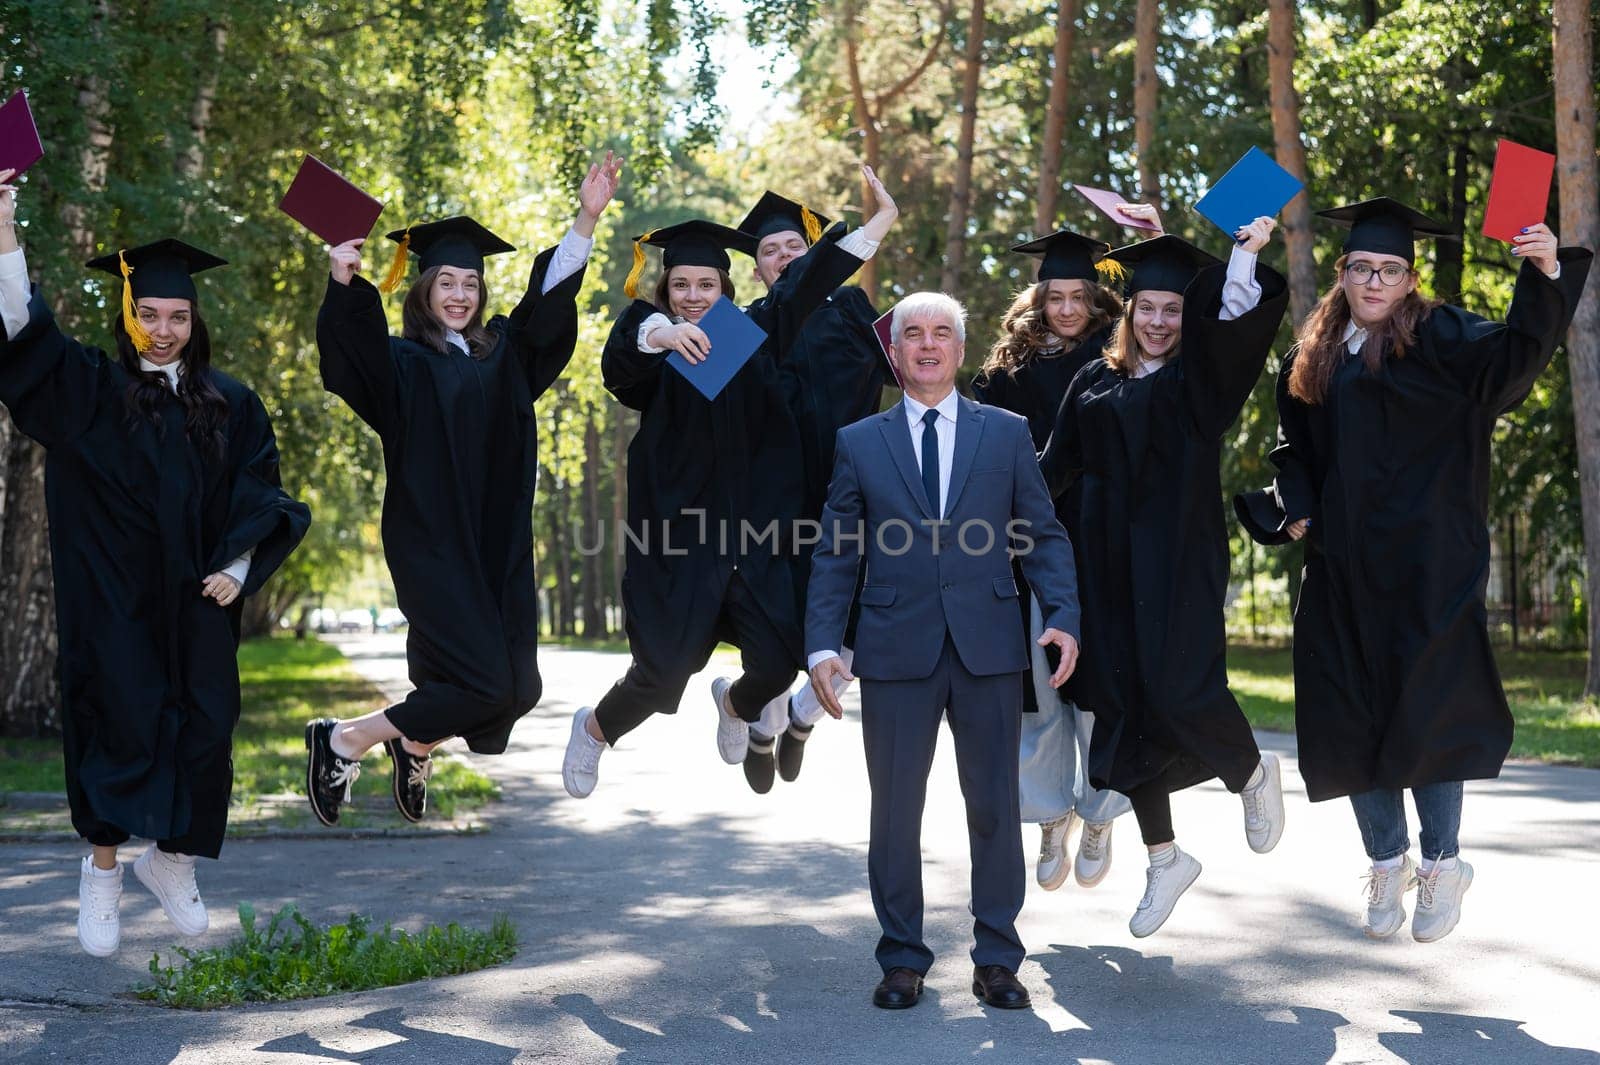 A university professor and seven robed graduates are jumping outdoors. by mrwed54